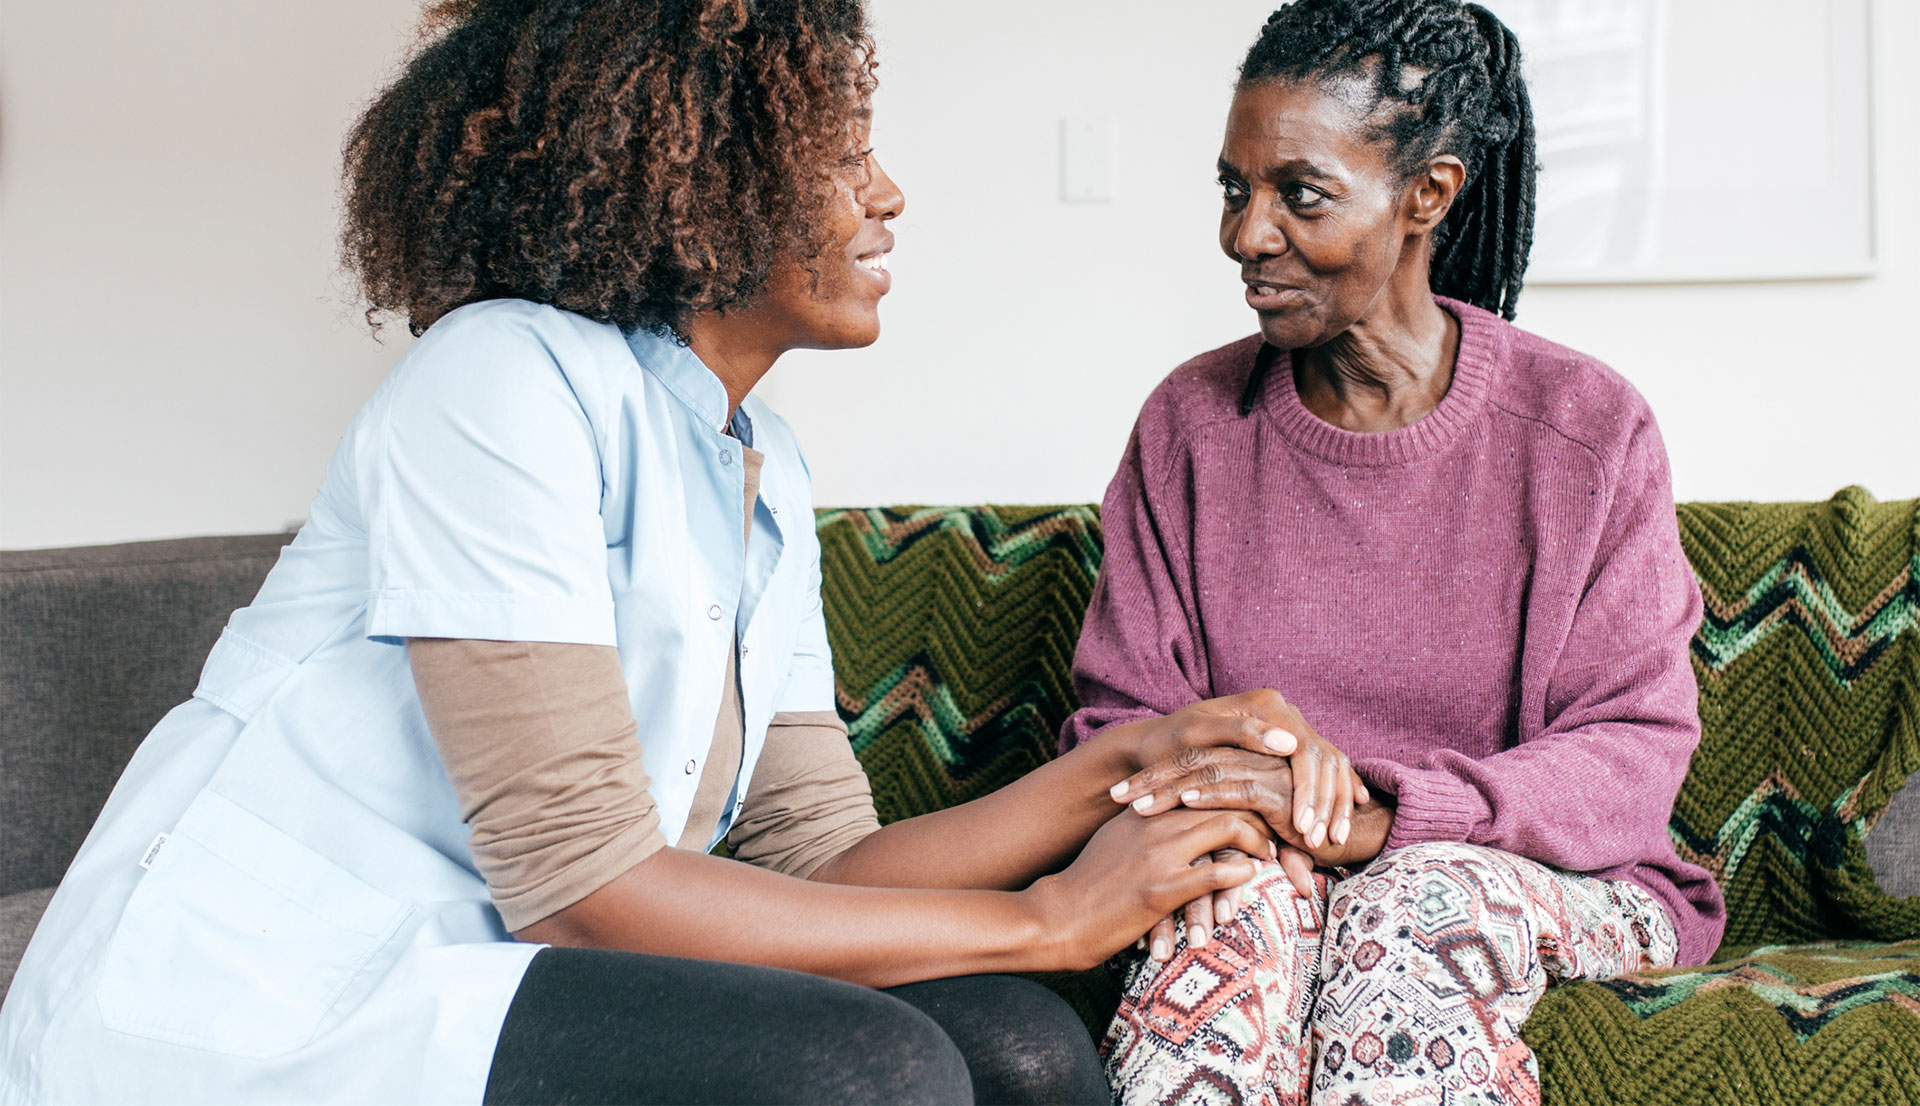 Nurse discussing long-term care options with patient